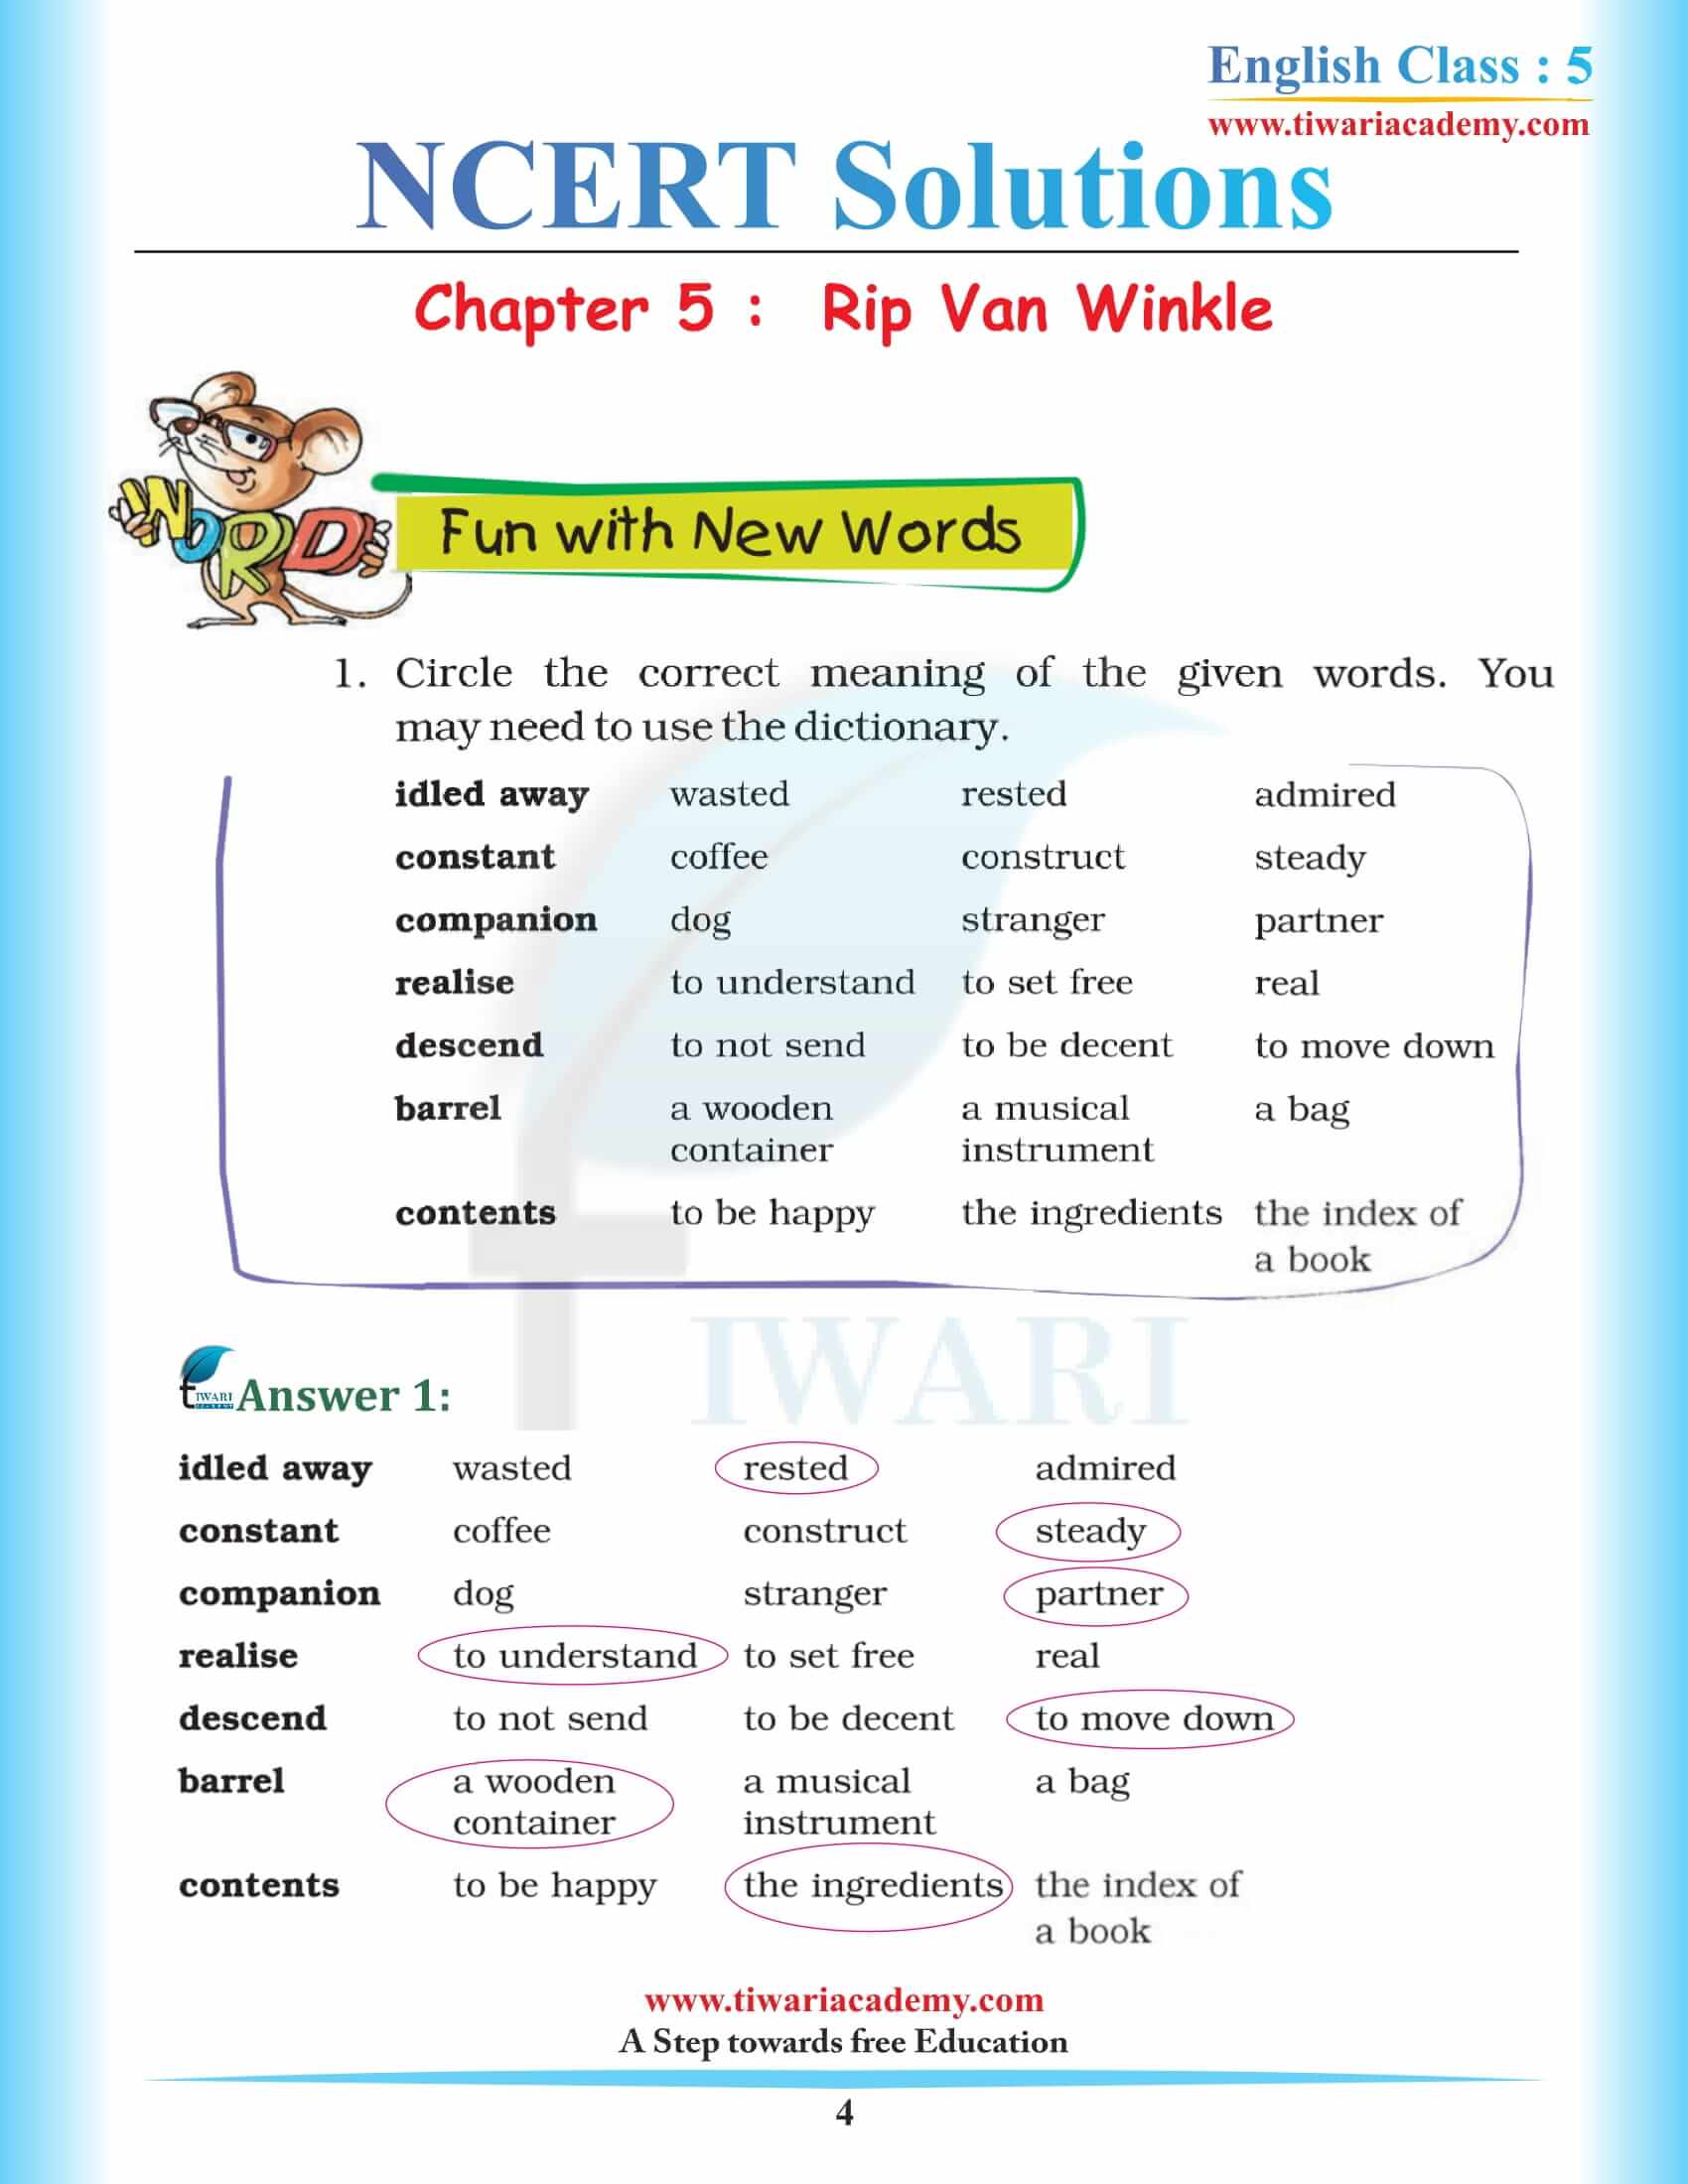 NCERT Solutions for Class 5 English Chapter 5 Rip Van Winkle